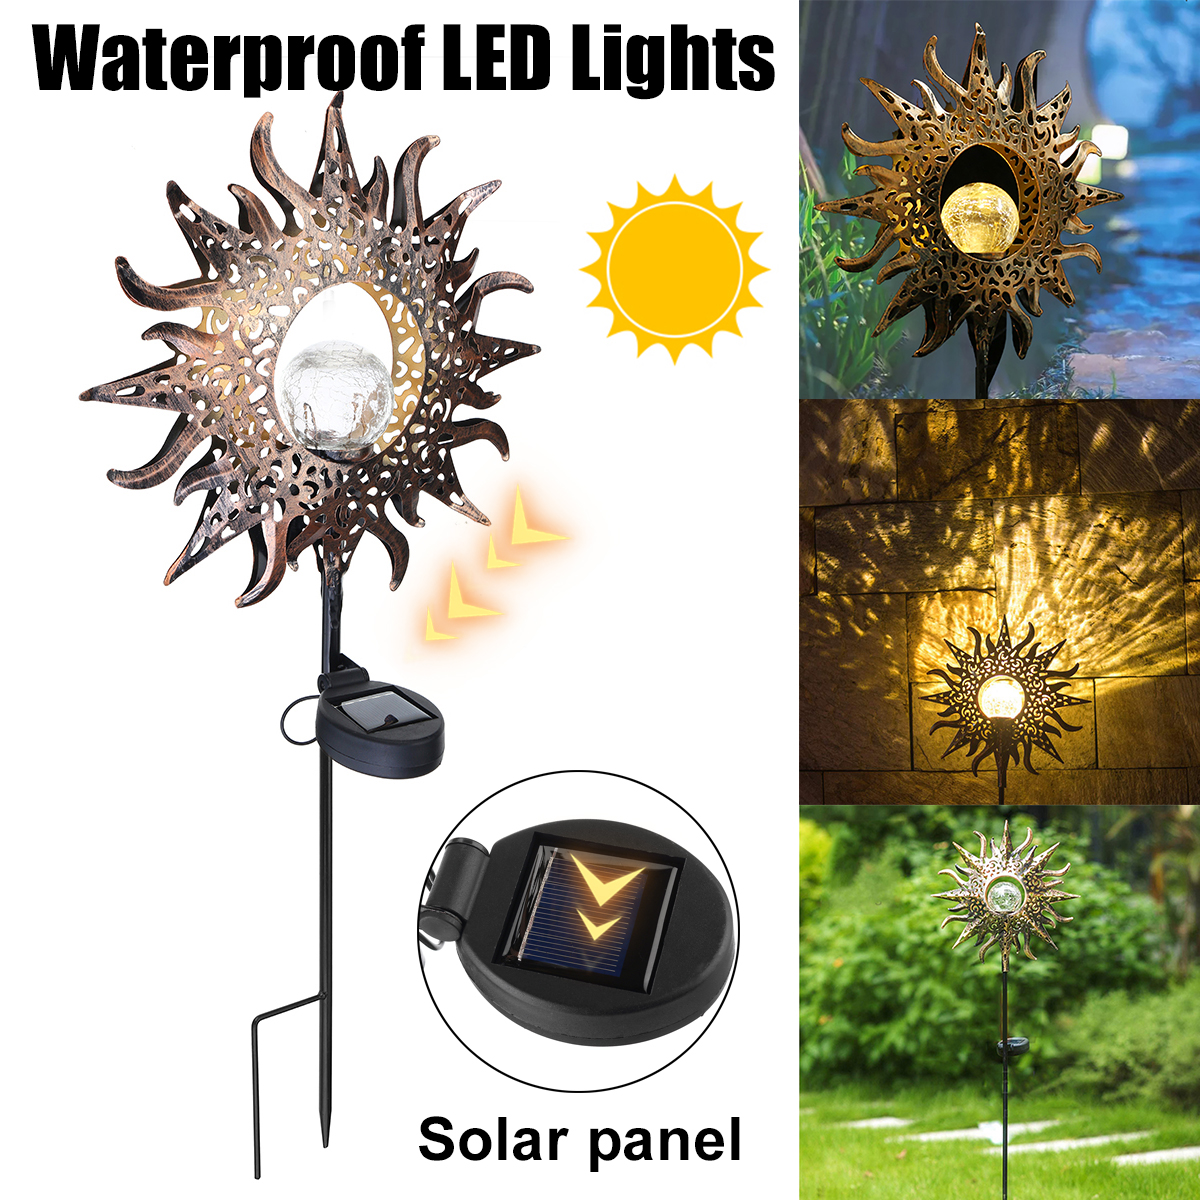 Solar-Powered-LED-Stake-Lawn-Light-Sunflower-Waterproof-Patio-Outdoor-Garden-Path-Lamp-1707064-1